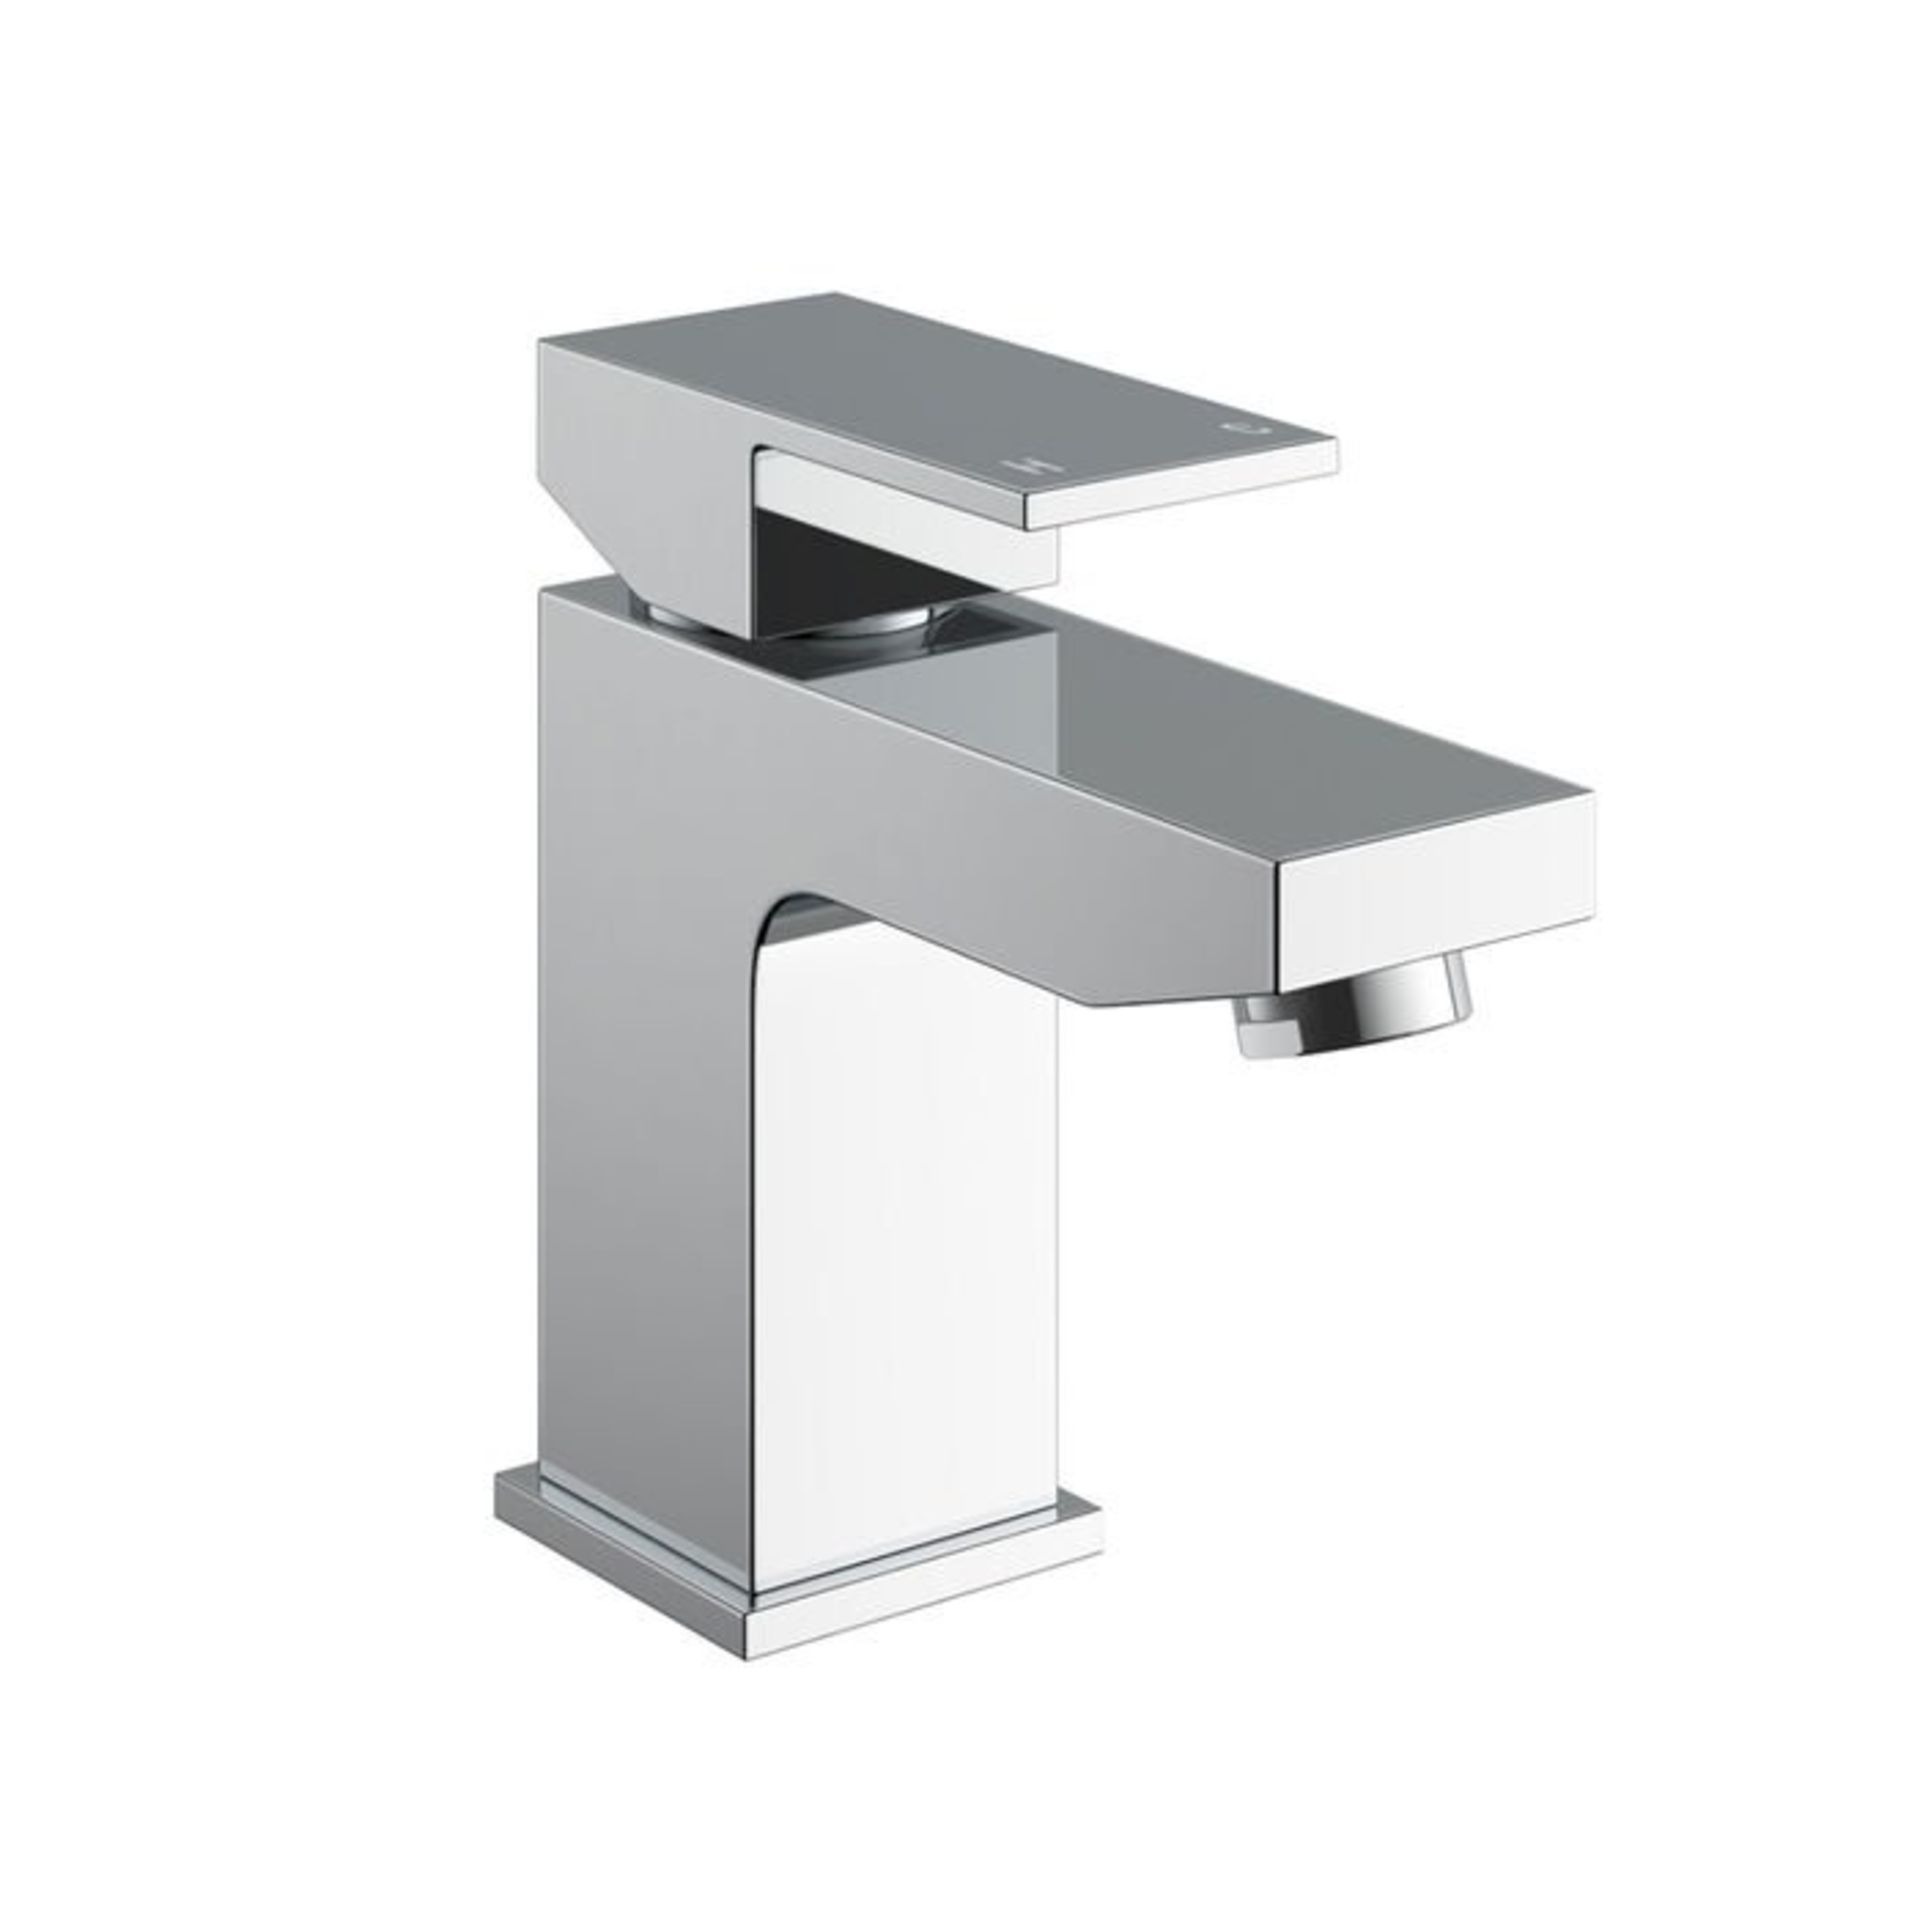 (S63) Harper Basin Mixer Tap Crafted from anti-corrosive chrome plated solid brass and includes a - Image 3 of 3